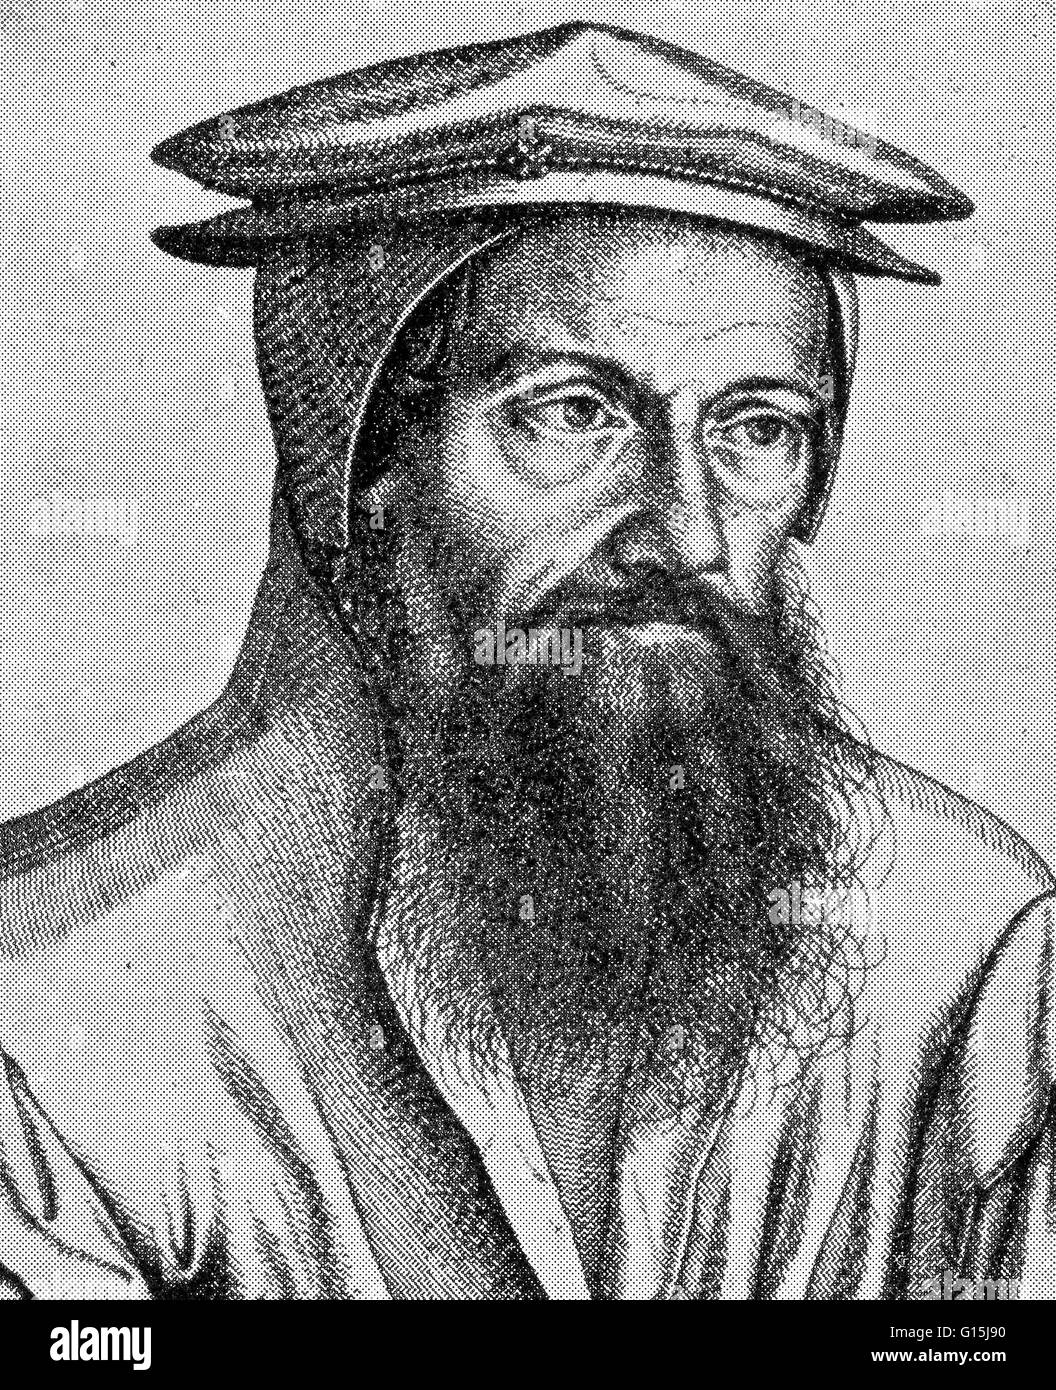 Conrad Gesner (March 26, 1516 - December 13, 1565) was a Swiss naturalist and bibliographer. His five-volume Historiae animalium (1551-1558) is considered the beginning of modern zoology, and the flowering plant genus Gesneria (Gesneriaceae) is named afte Stock Photo